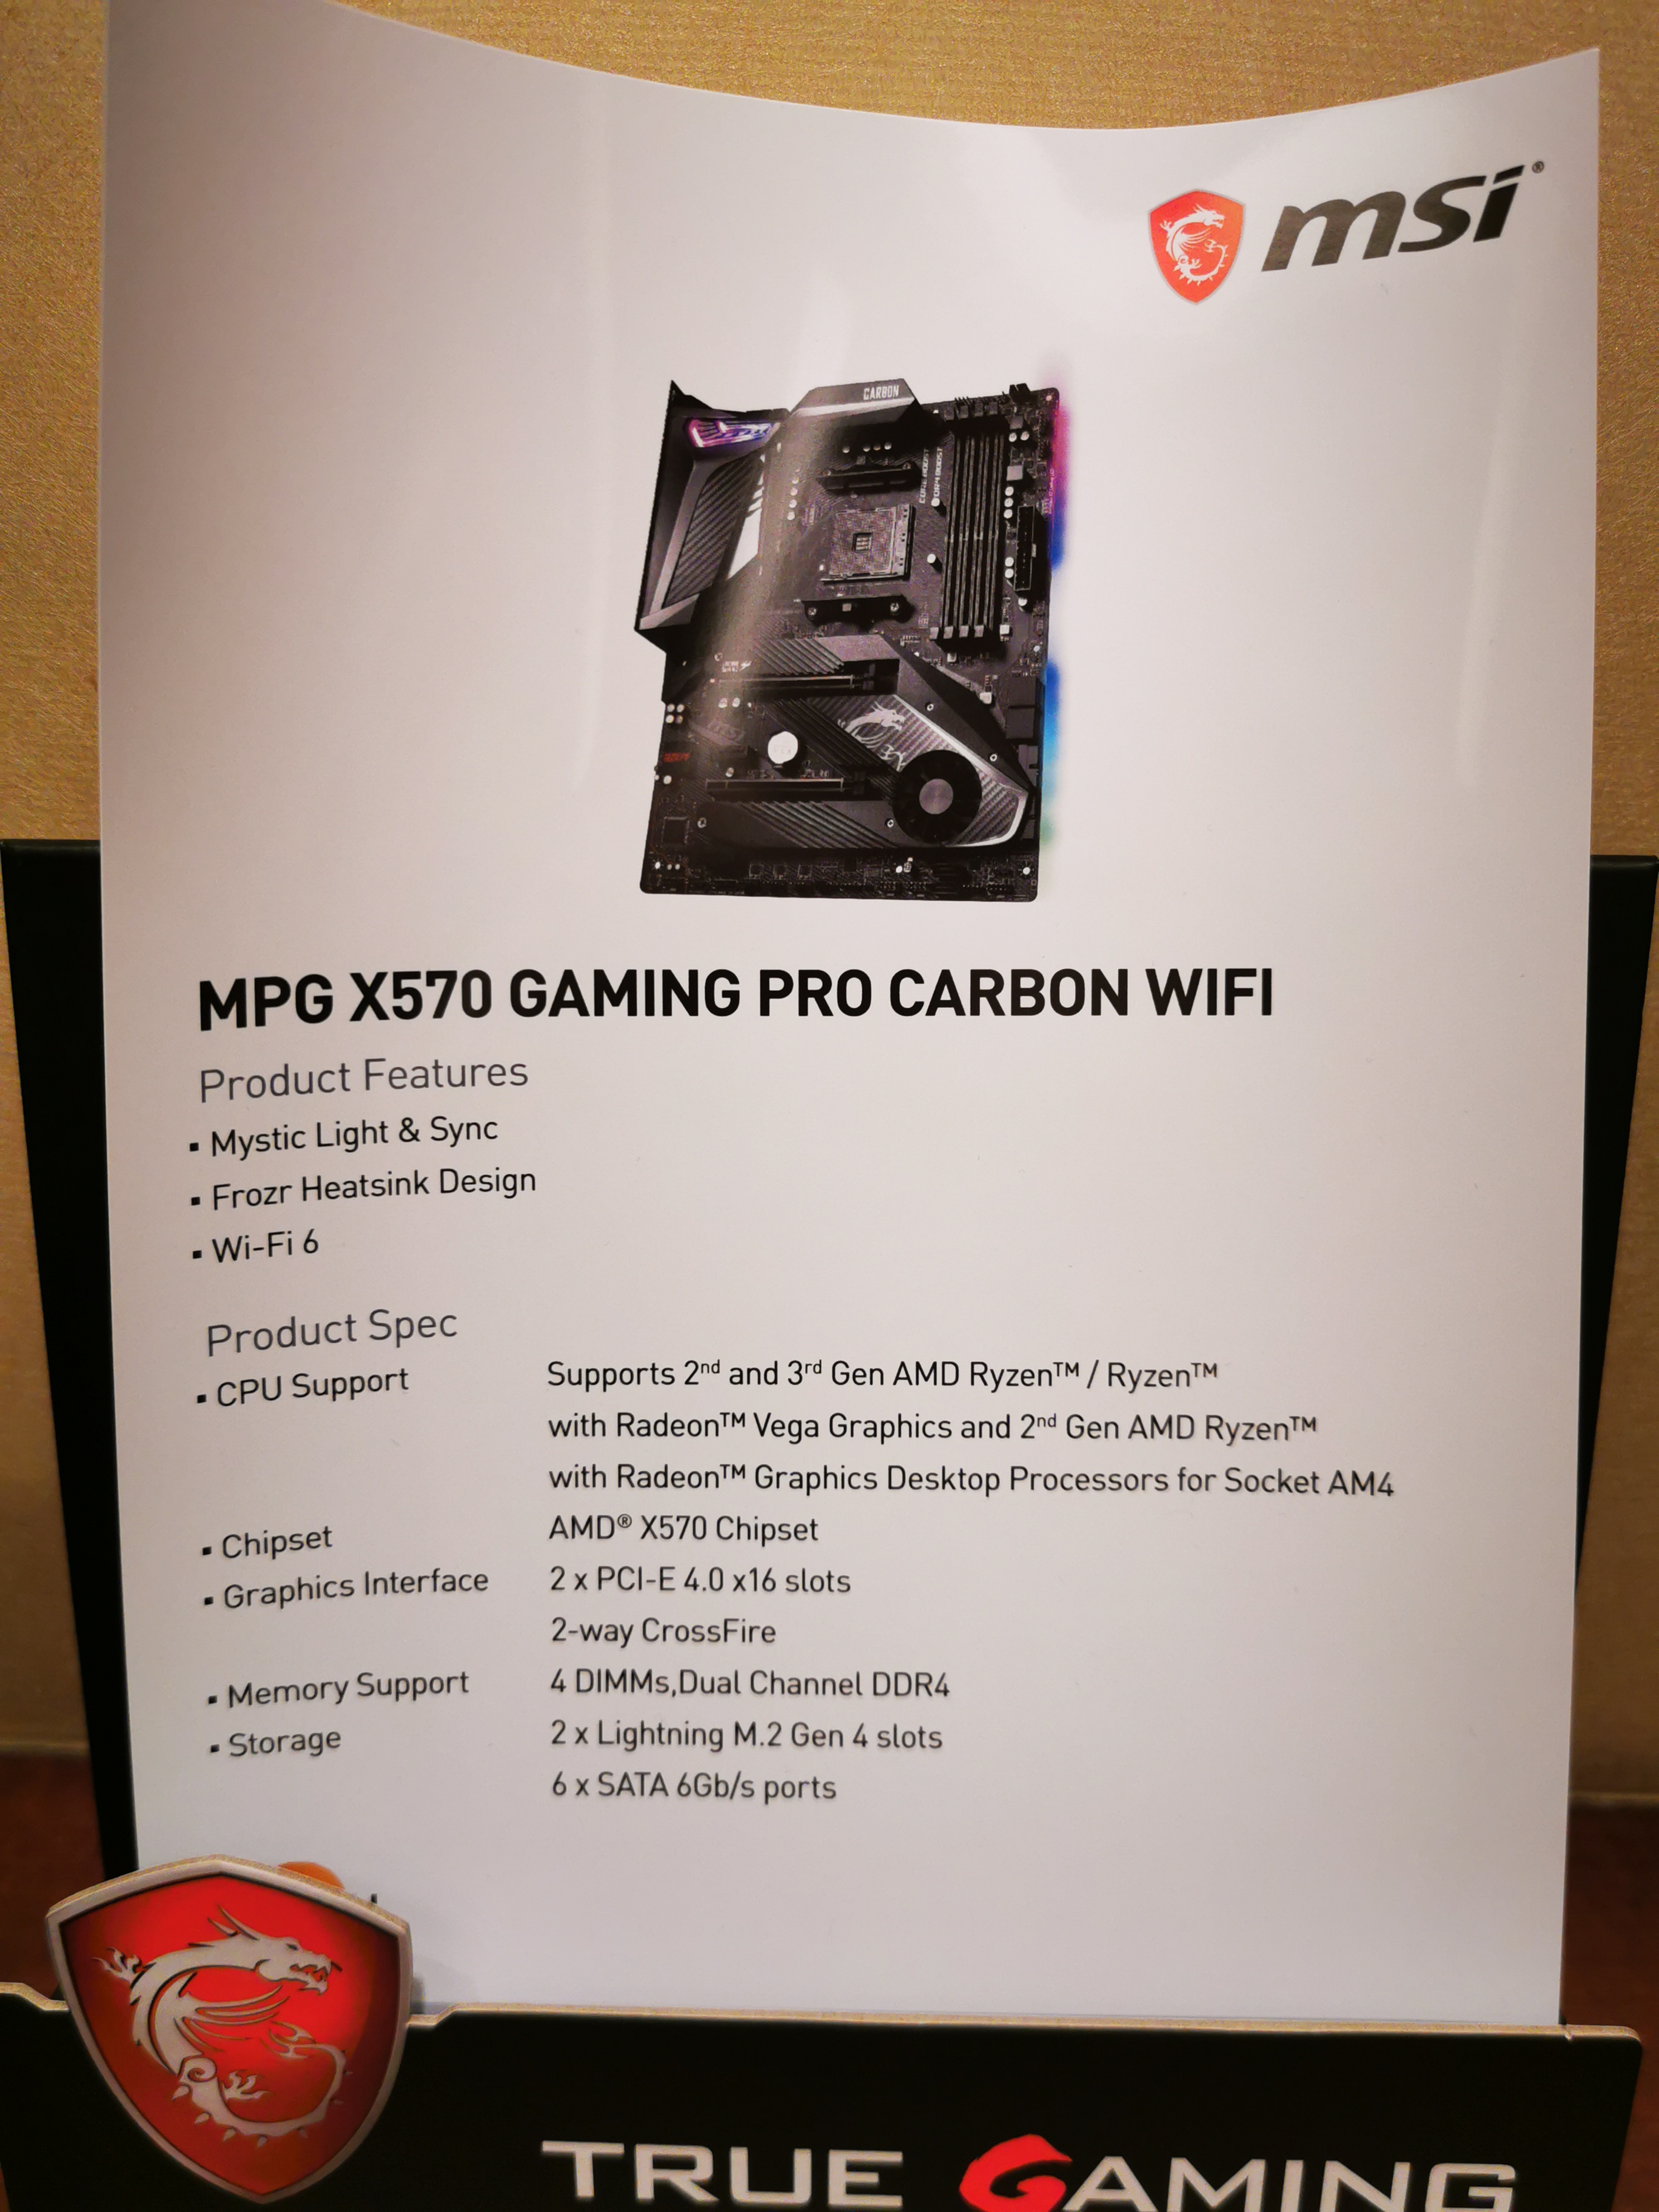 The MSI MPG X570 Gaming Pro Carbon WIFI Motherboard: Two PCIe 4.0